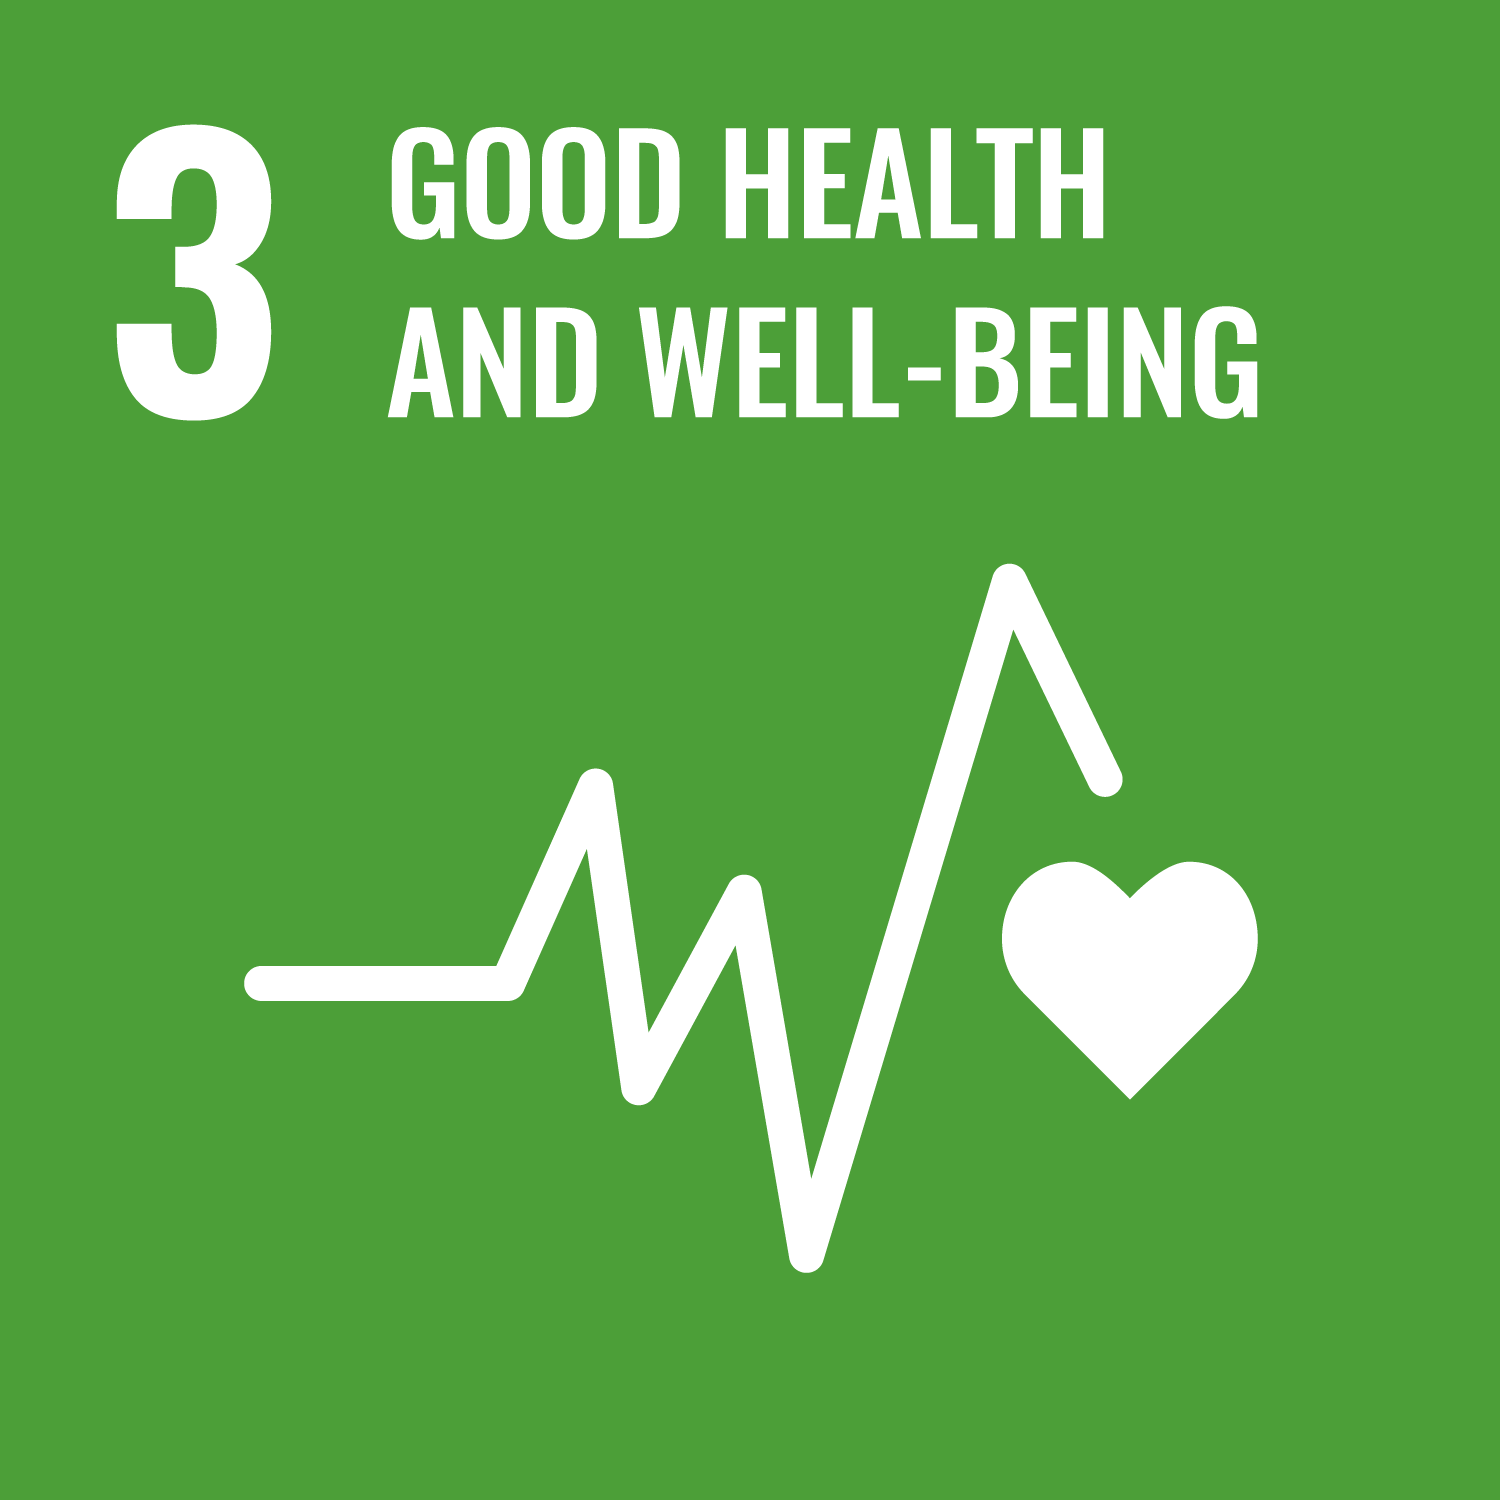 SDG 3- Good Health and Well-Being